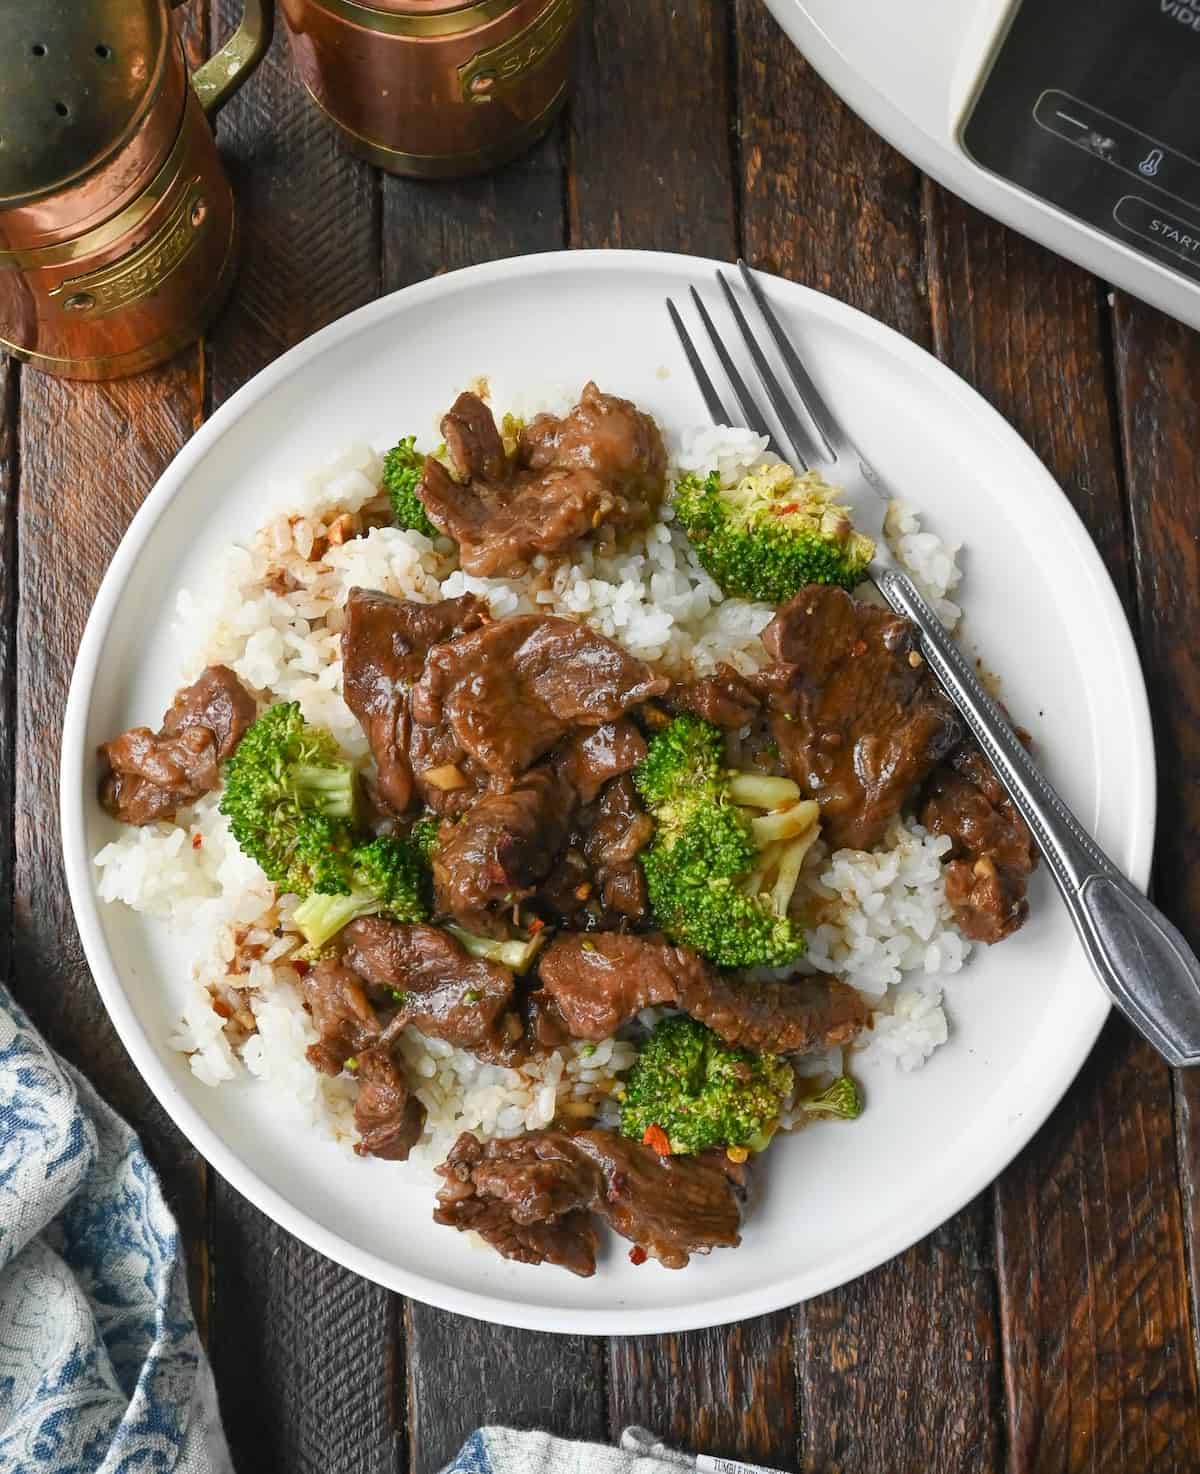 Close up of beef and broccoli on top of white rice.